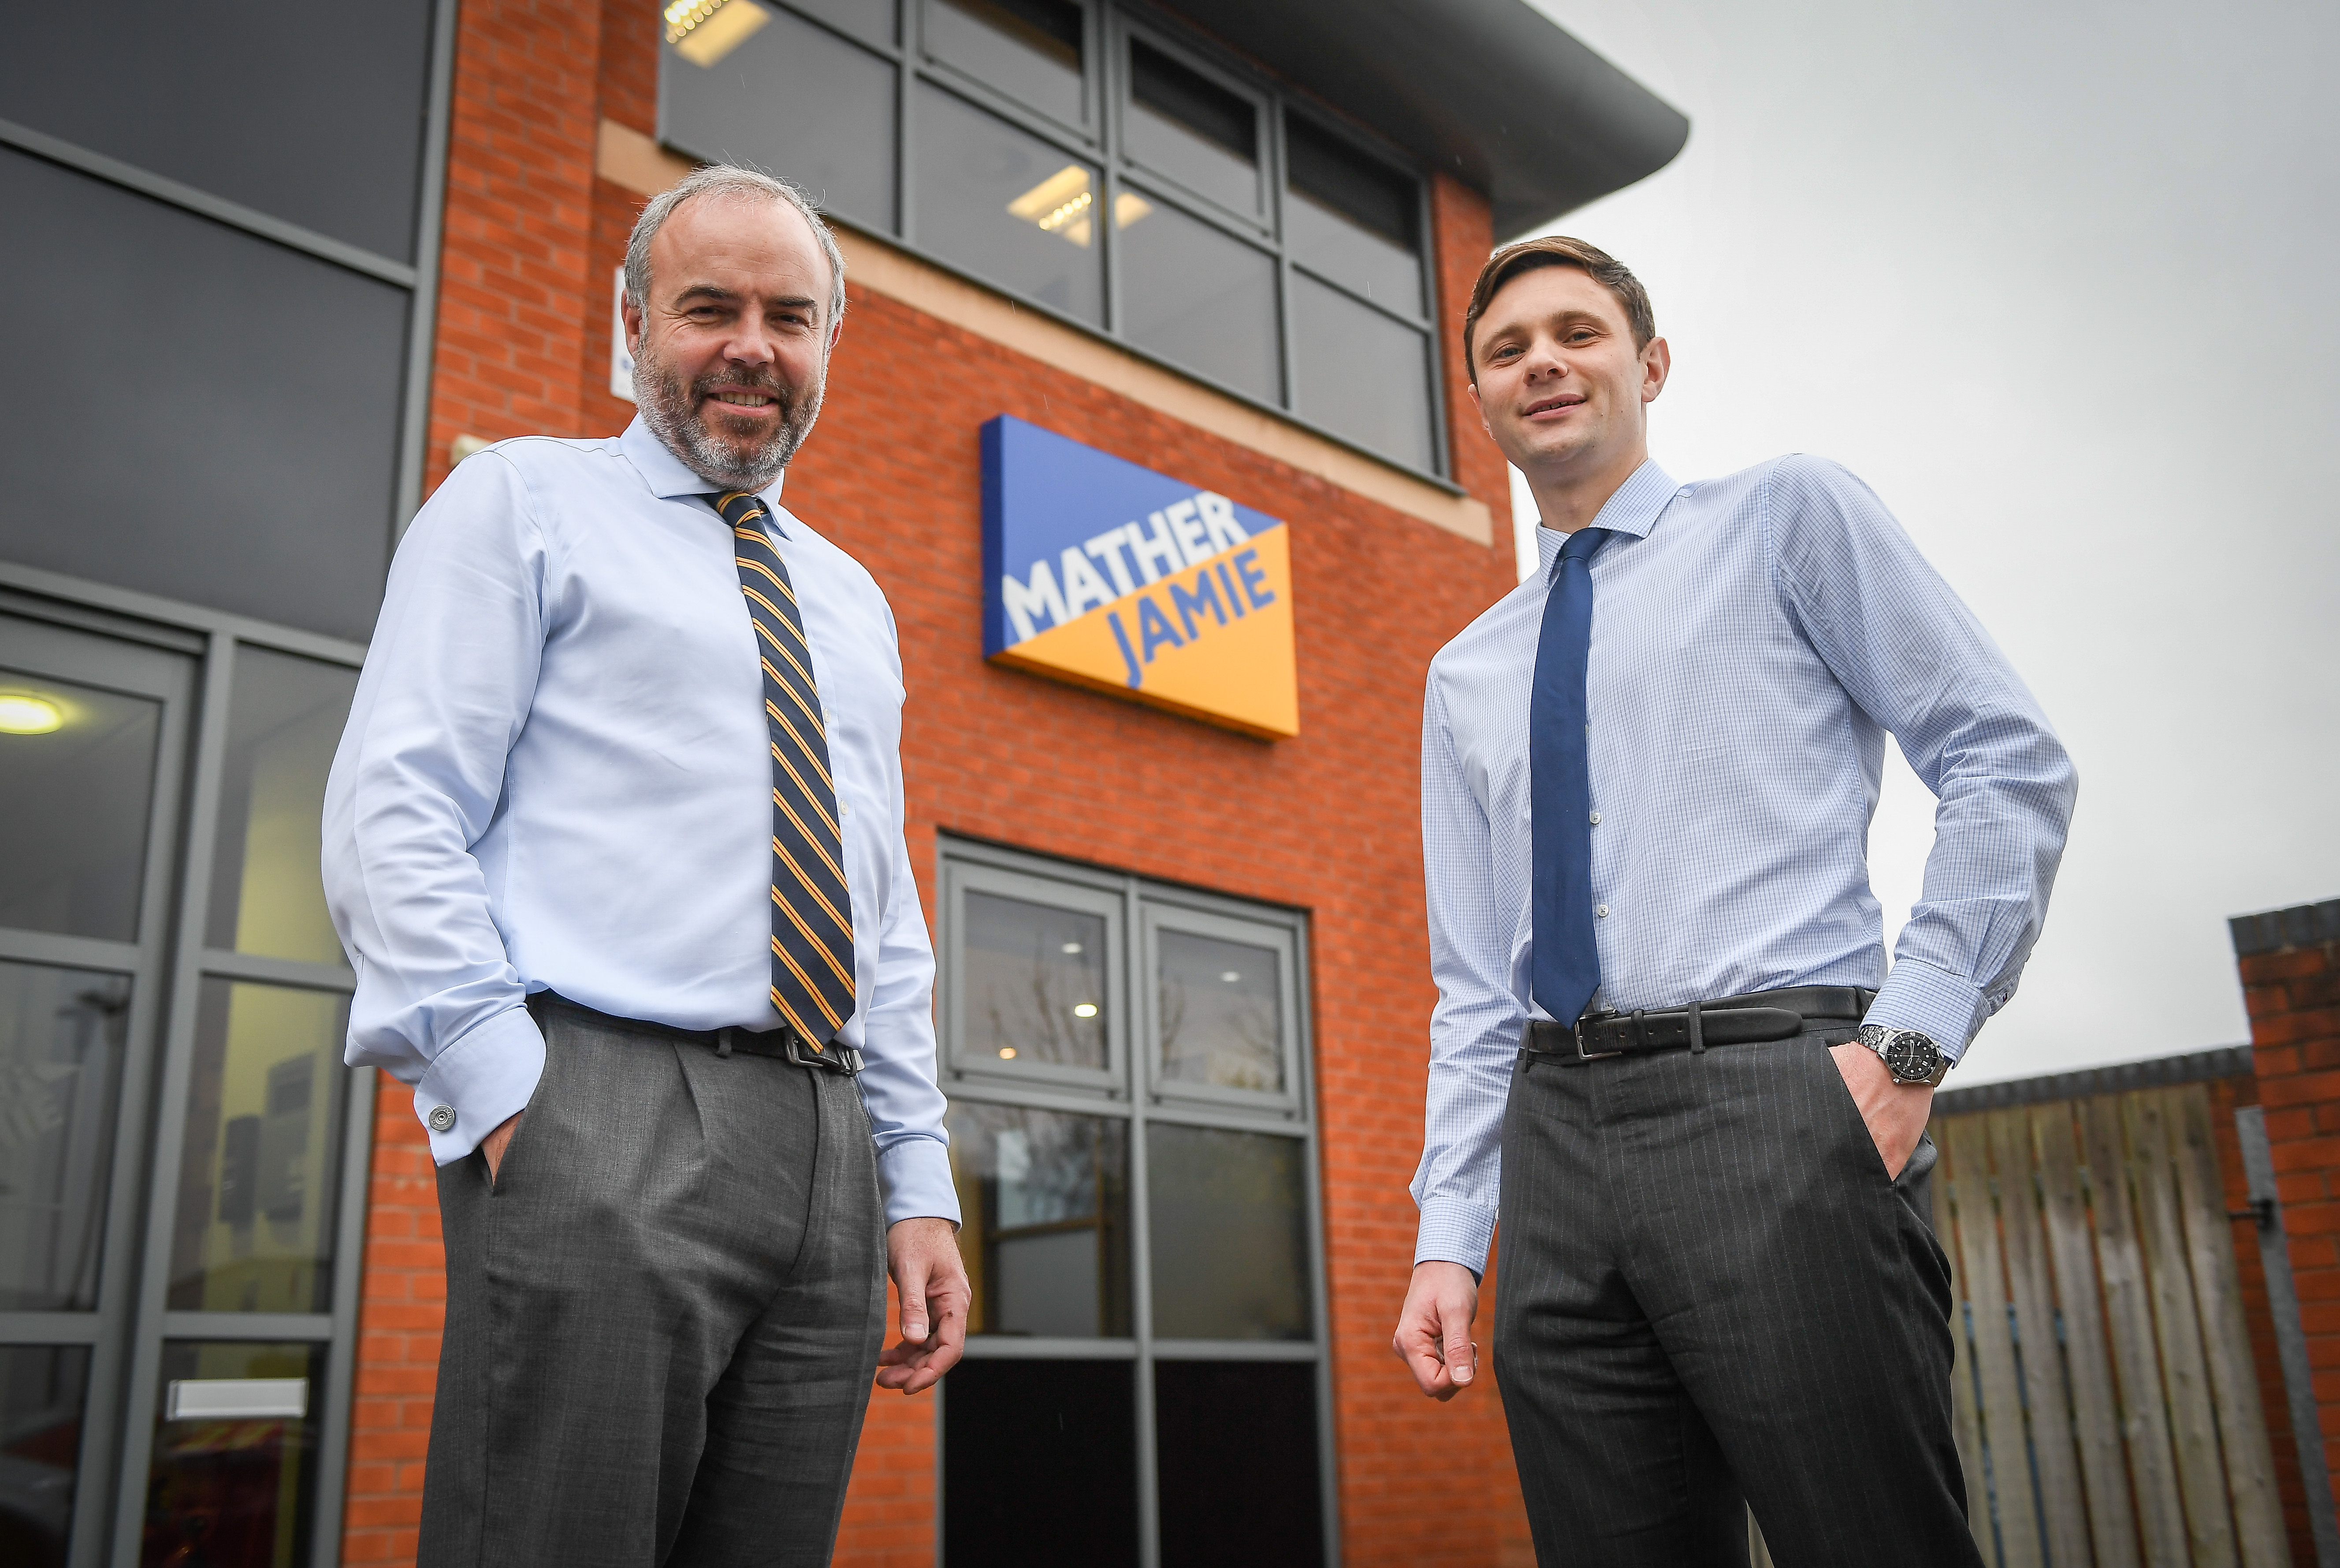 New Associate Director brought on at leading Midlands surveyor 